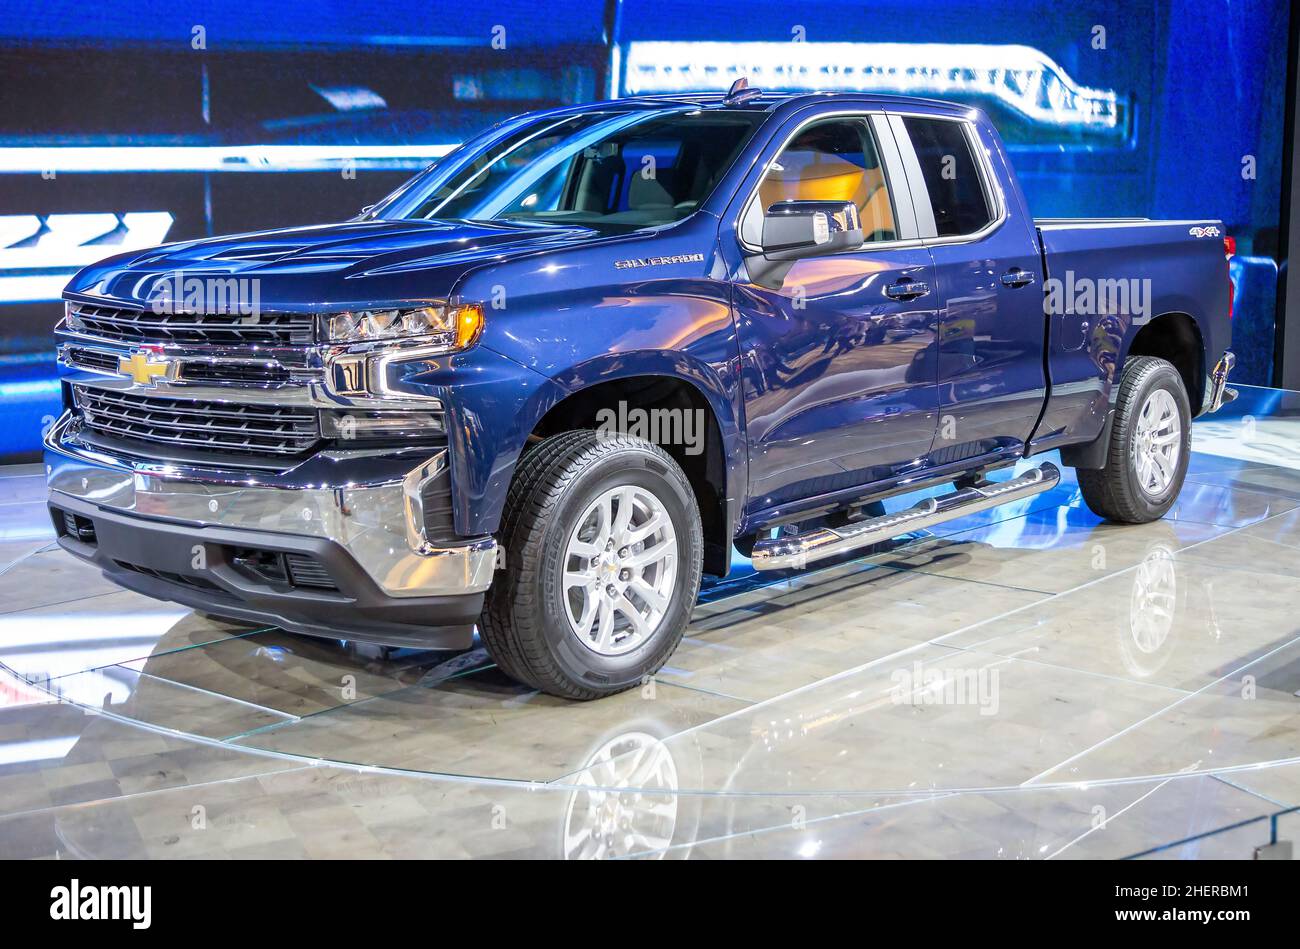 A Chevrolet Silverado pickup truck on display at the 2018 North American International Auto Show in Detroit, Michigan, USA. Stock Photo